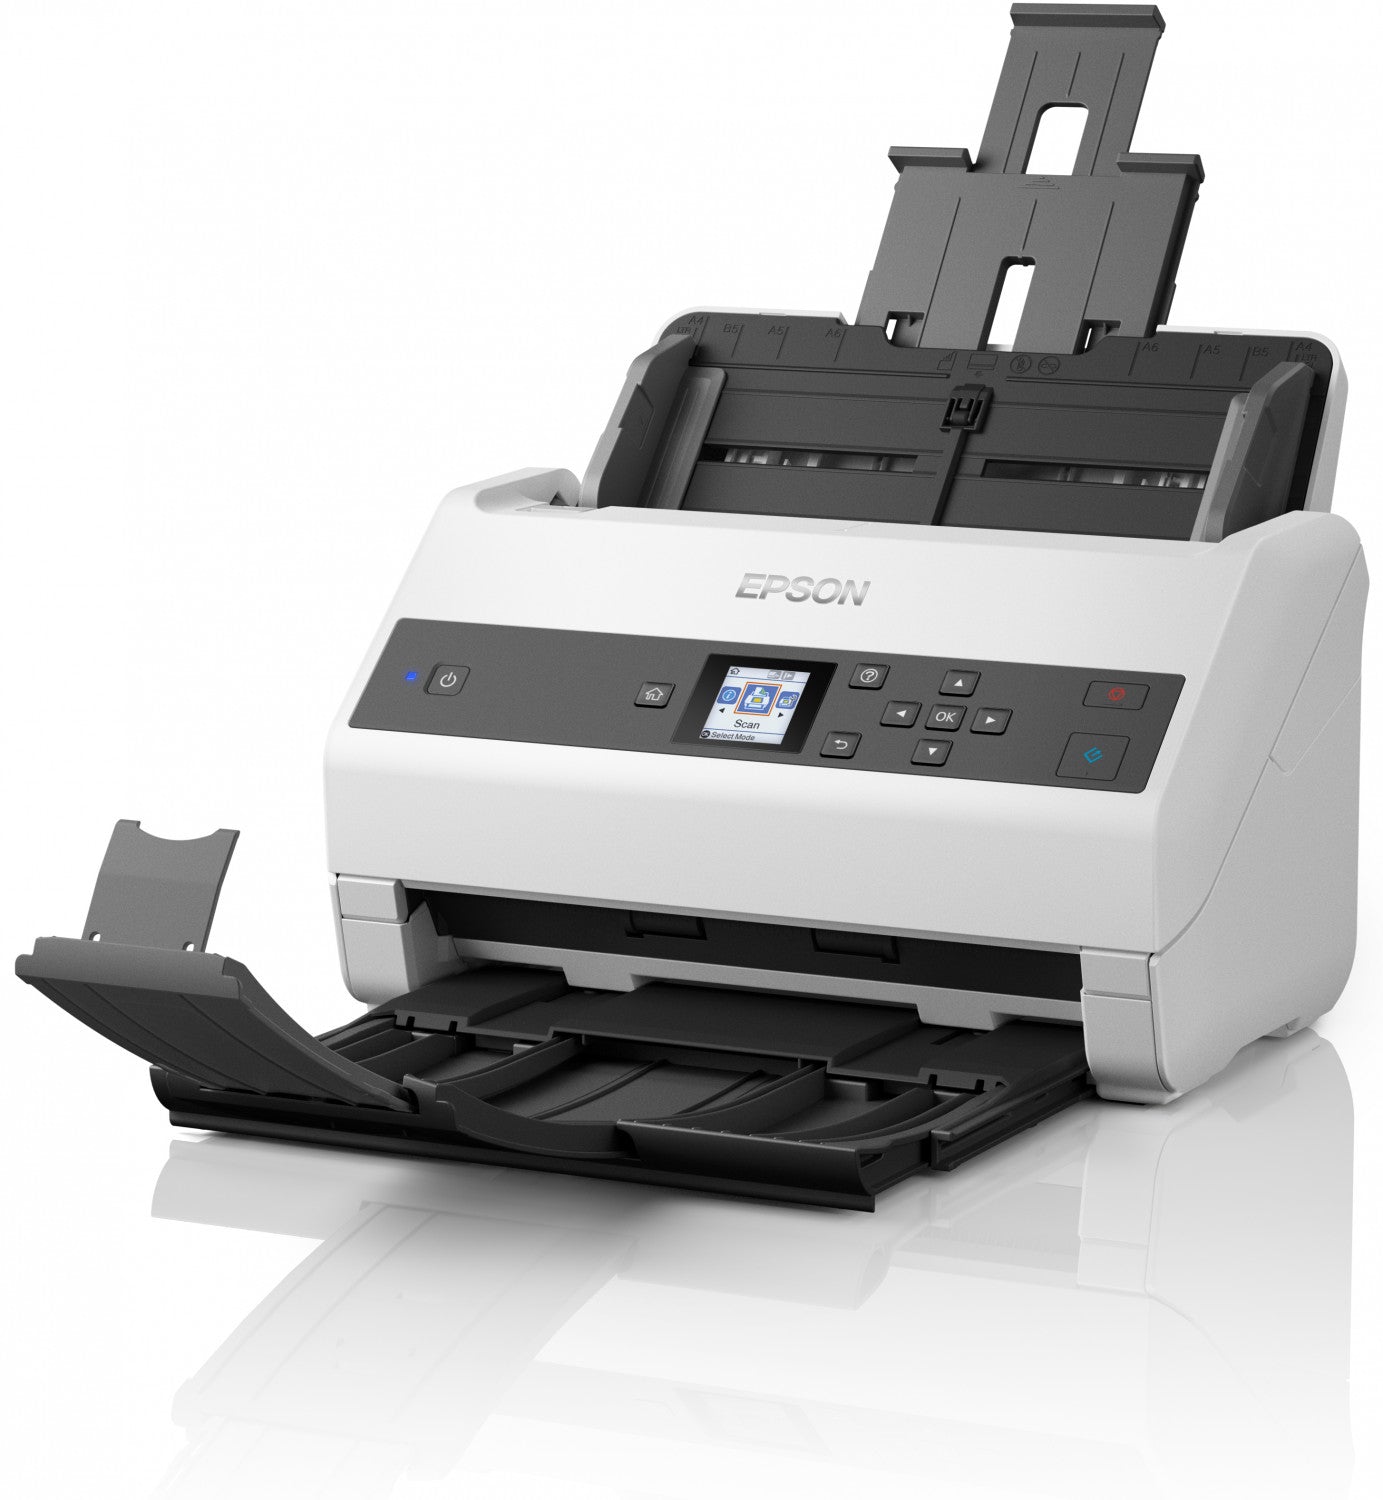 Epson Ds-870 Departmental Sheetfed Scanner